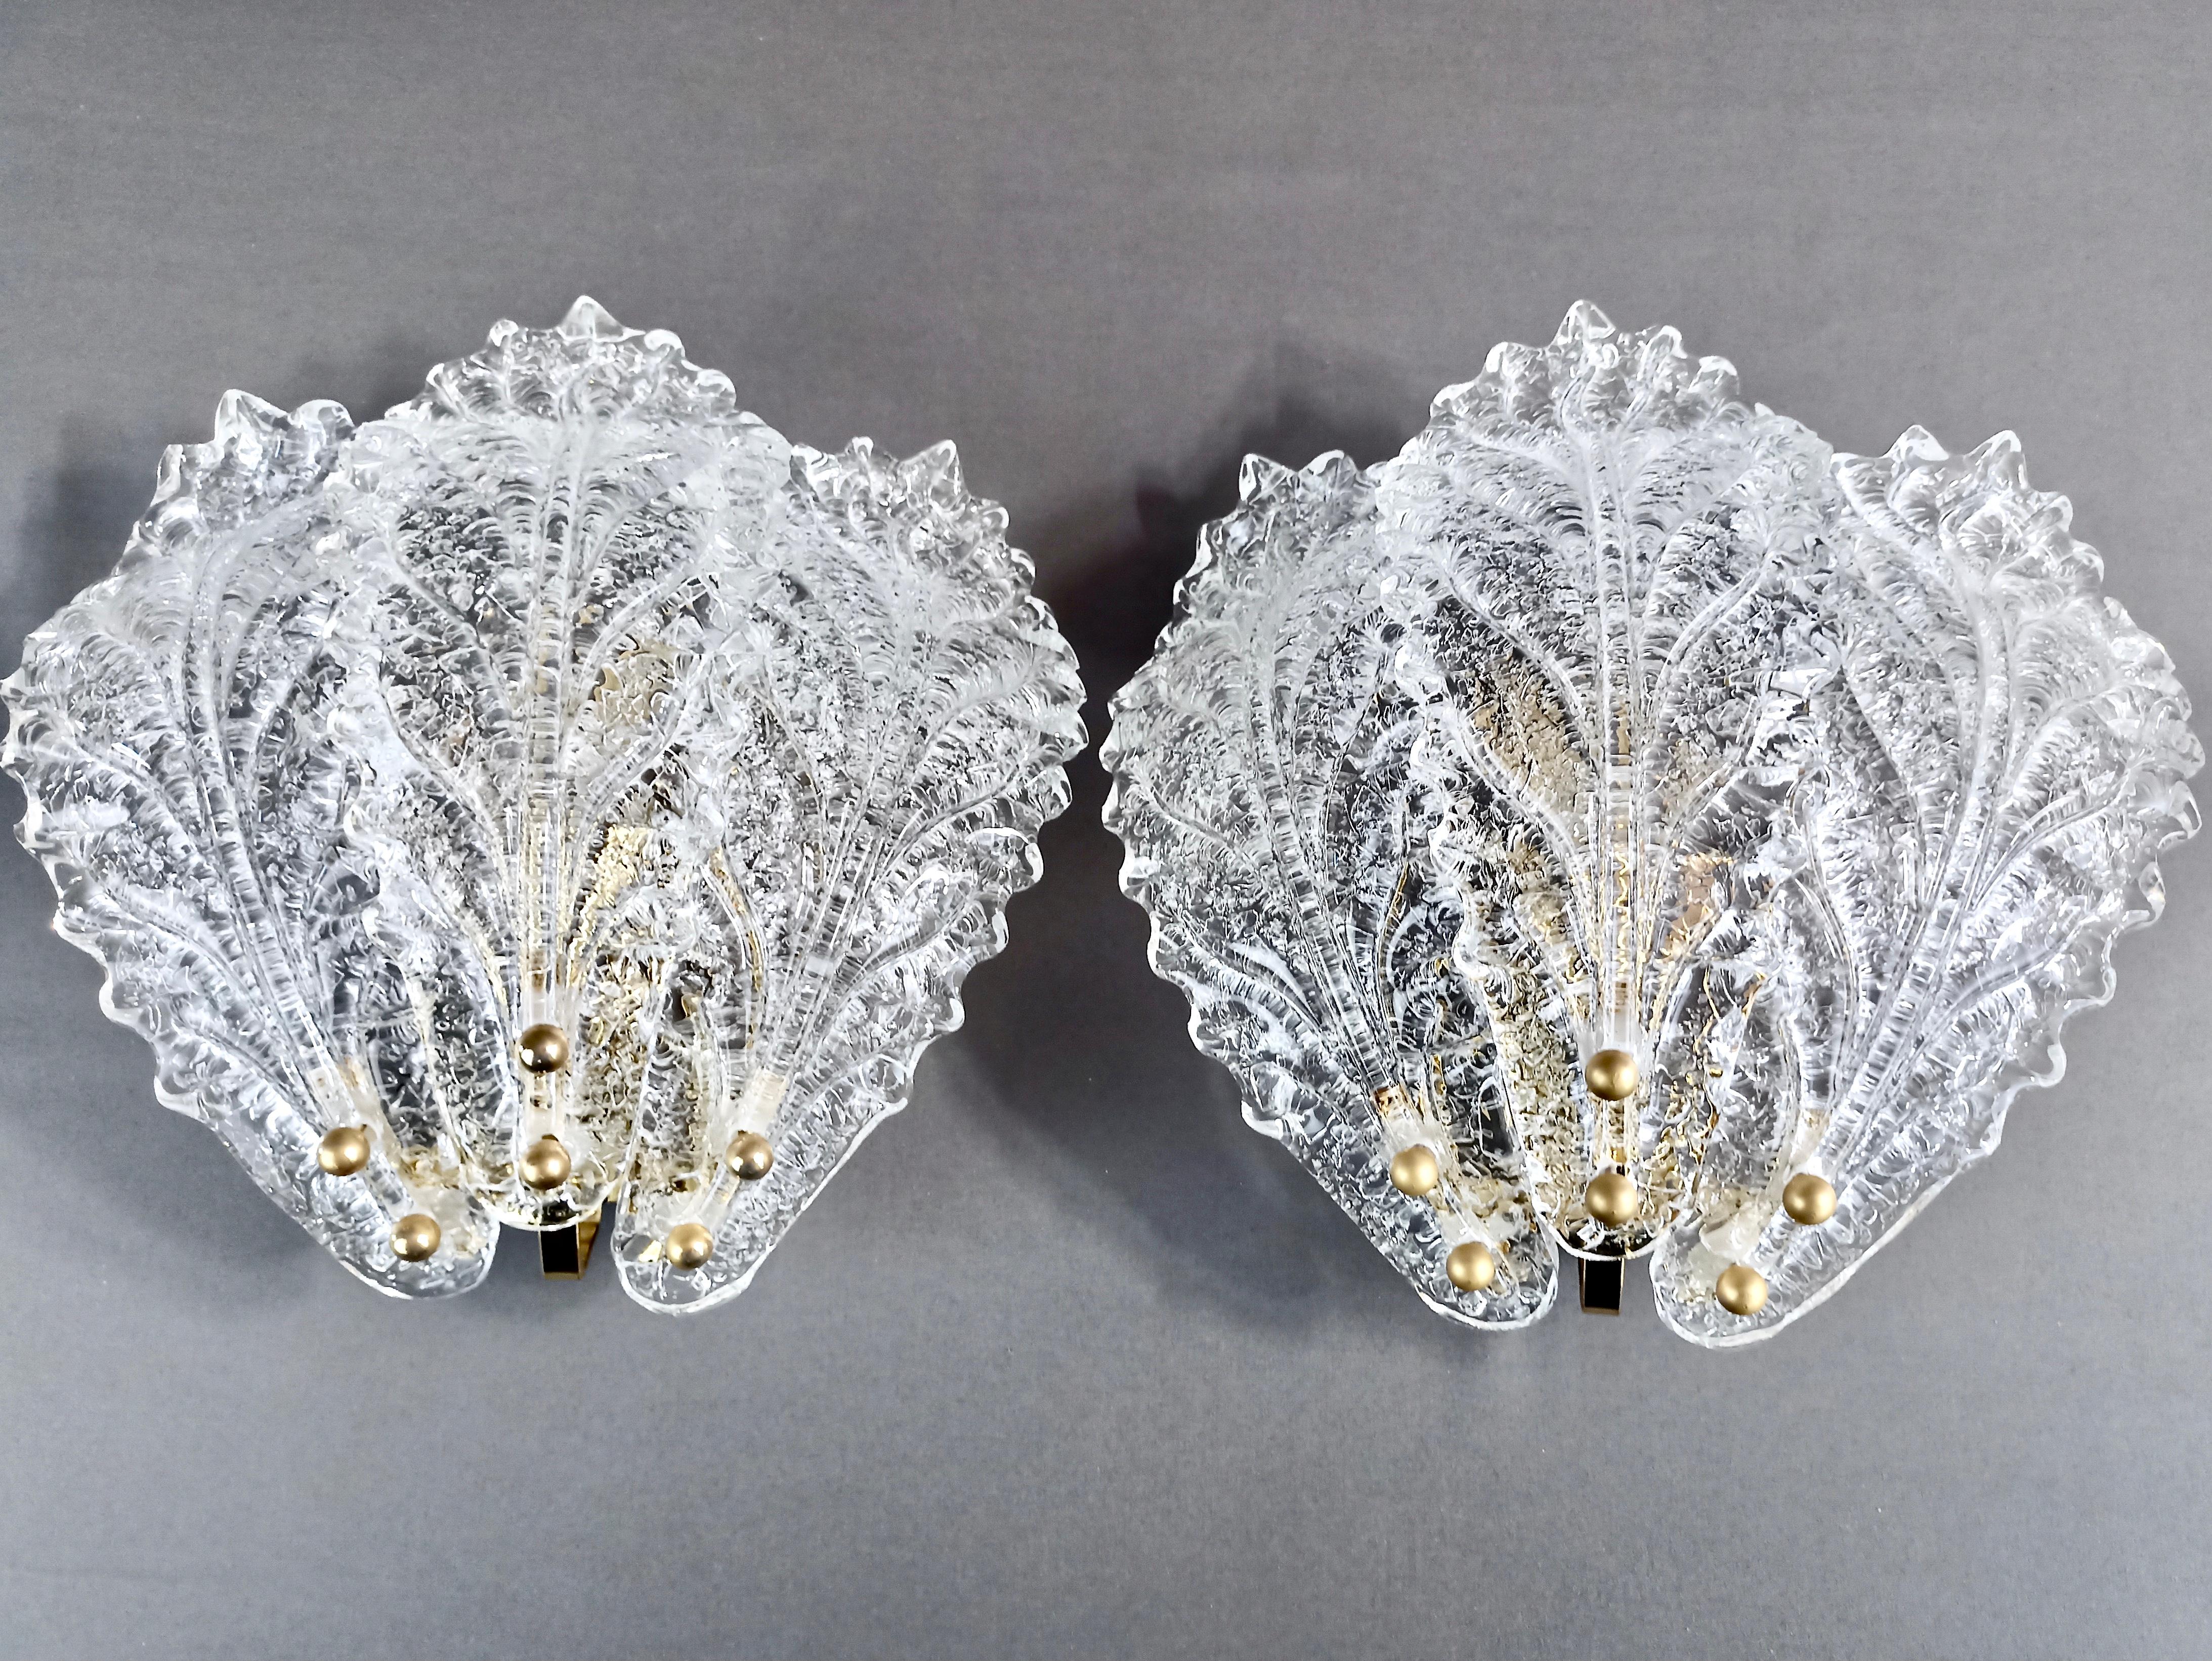 Fascinating pair of Murano art glass sconces from the 1990s in the classic Venetian graniglia workmanship. 
Each sconce is composed of three clear glass lampshades molded in the shape of leaves and features a stunning light effect, achieved by the